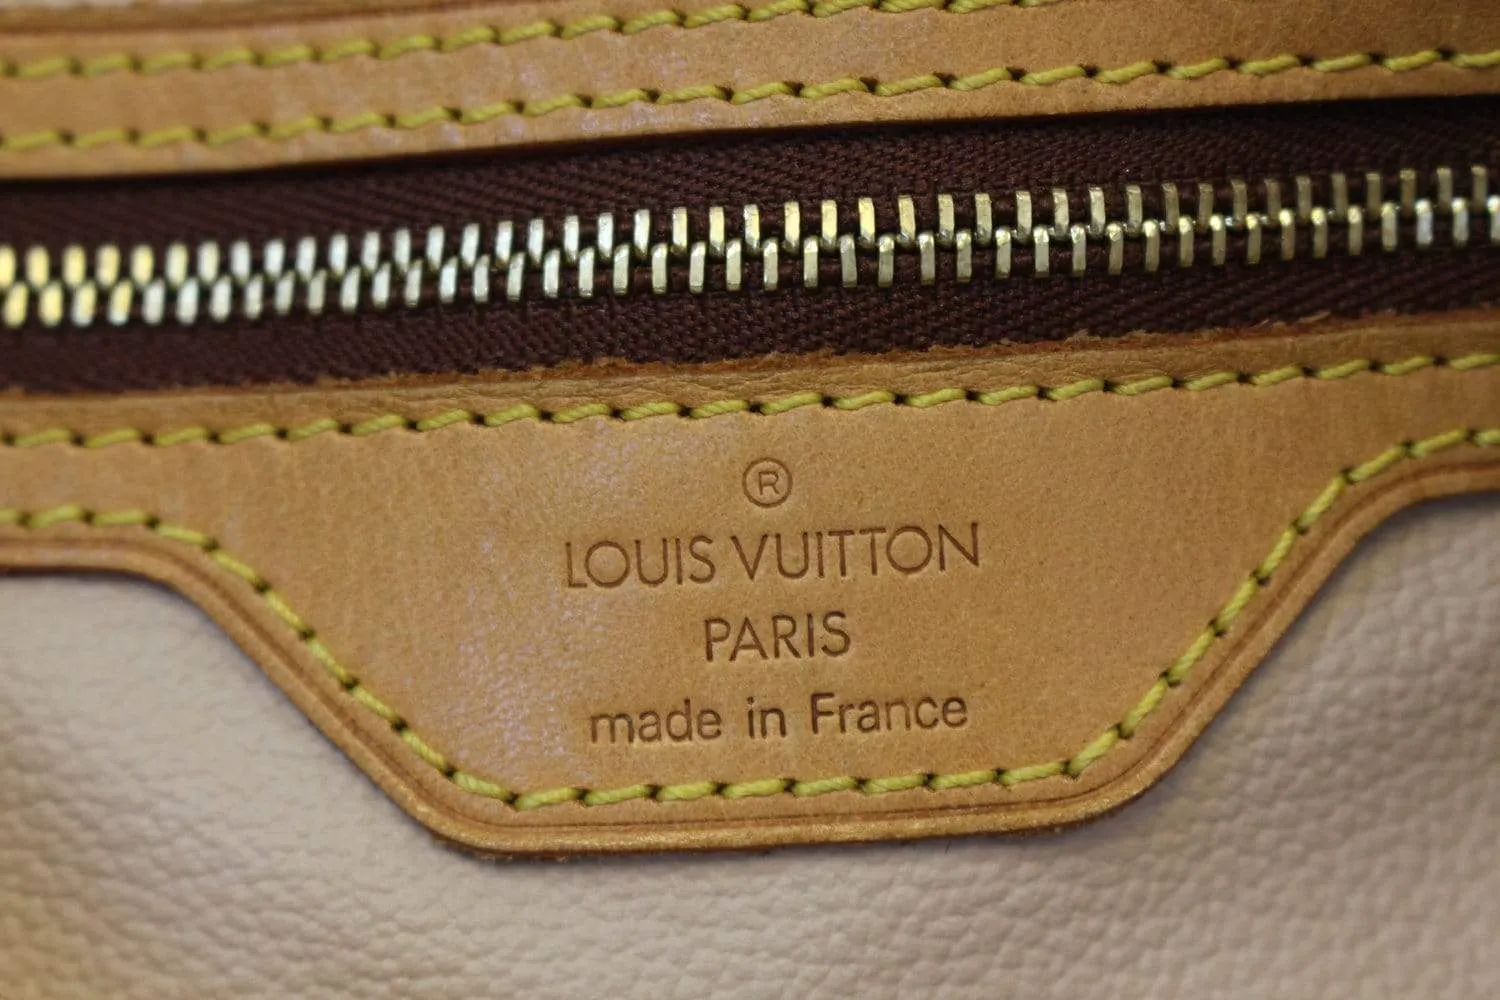 Louis Vuitton Luggage Tag made in France  Louis vuitton luggage tag Louis  vuitton Luggage tags